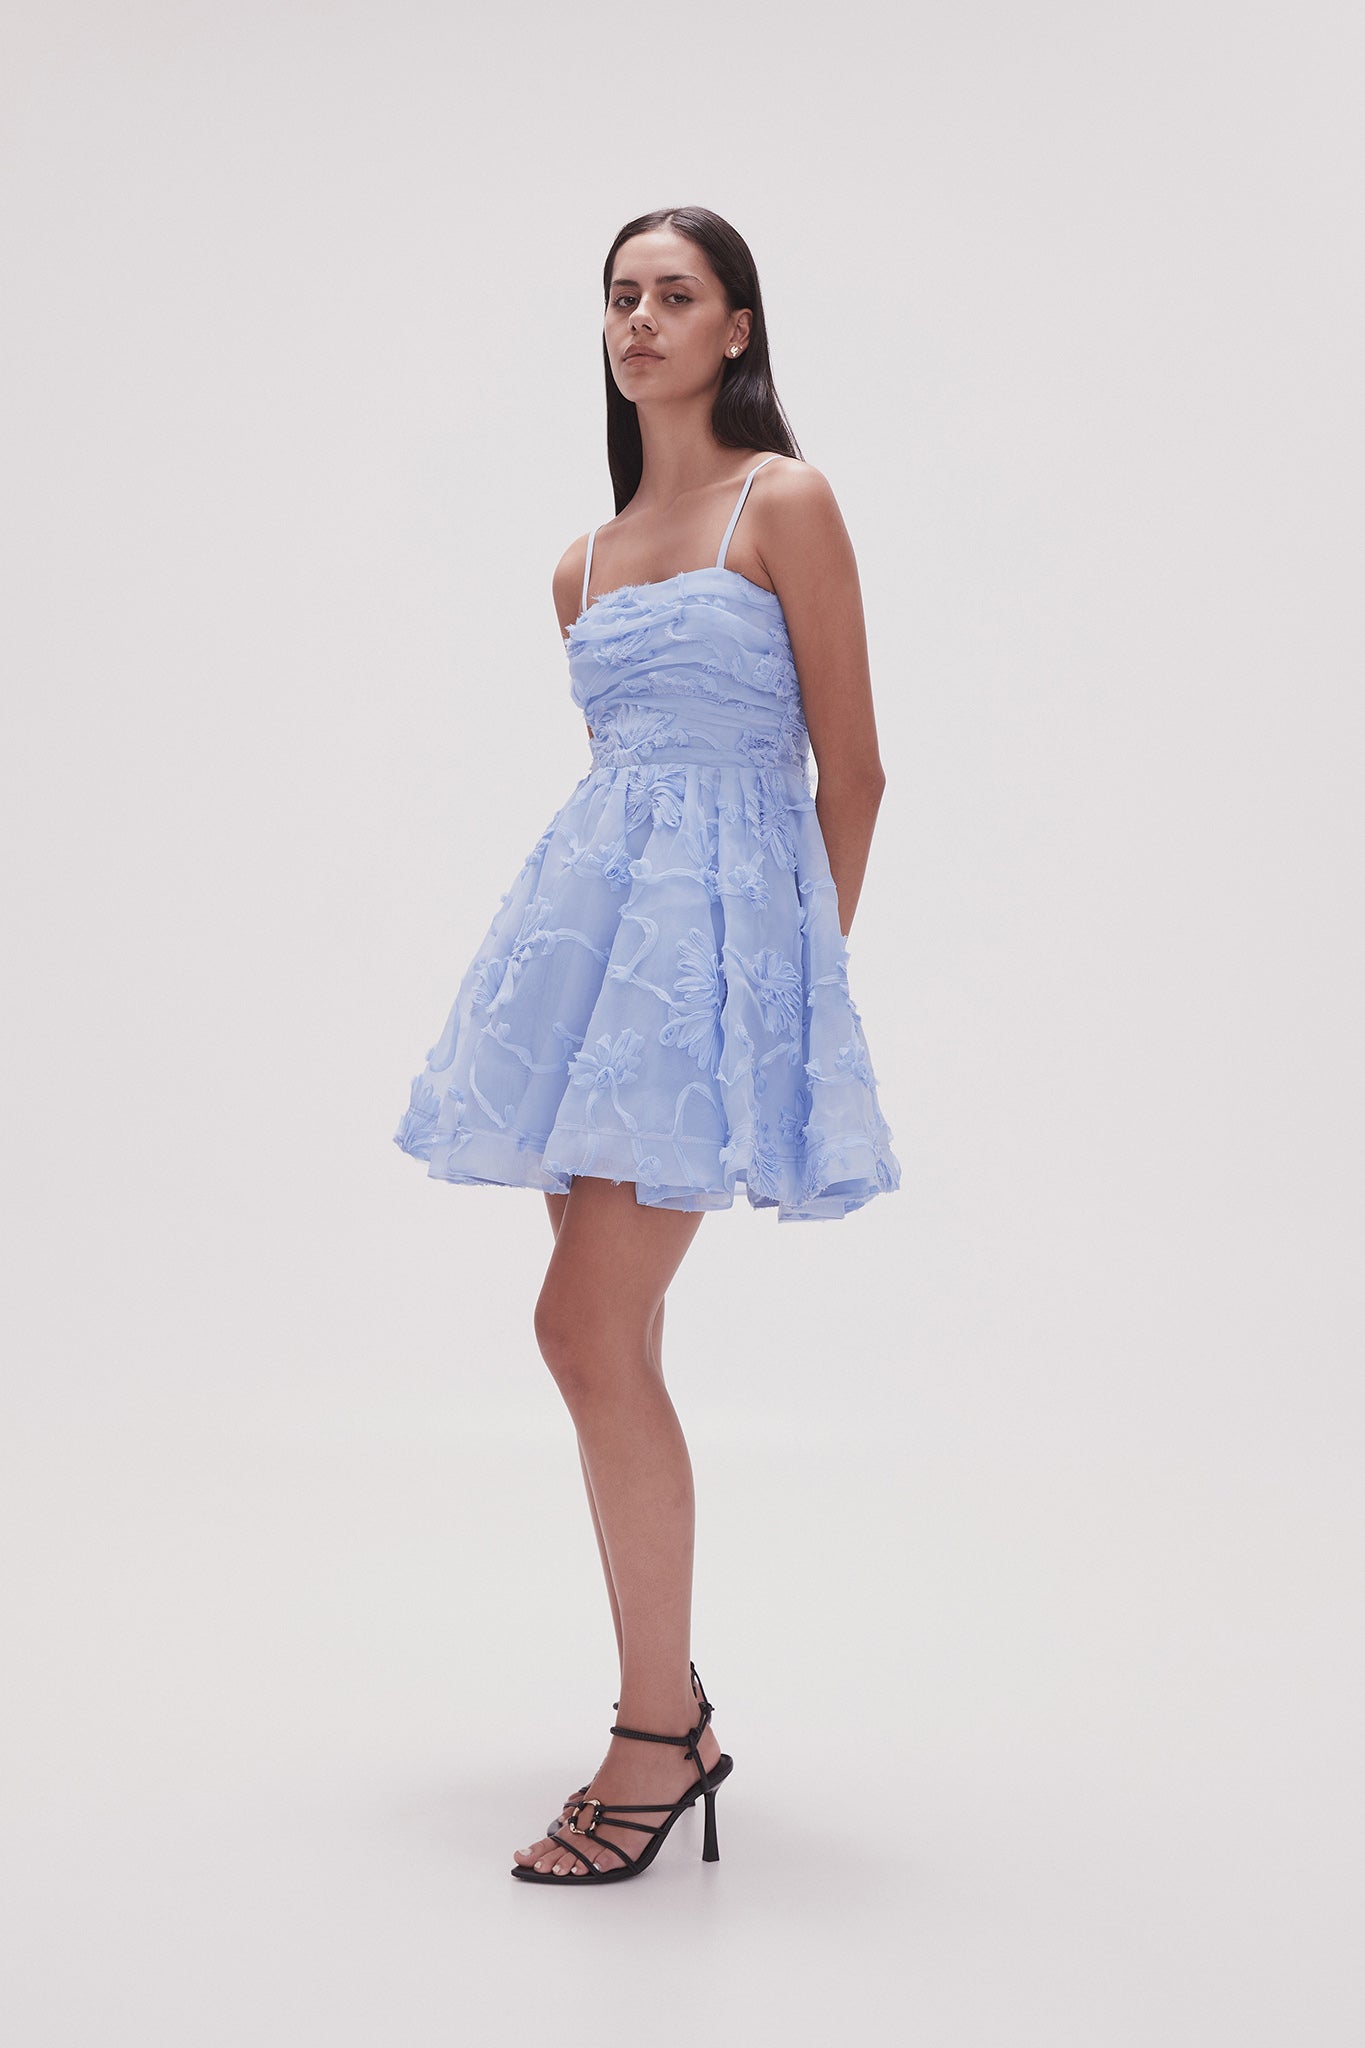 Sky blue or mint/teal wedding/prom dress with ruffled tiered skirt - Mother  & daughter combo or separate